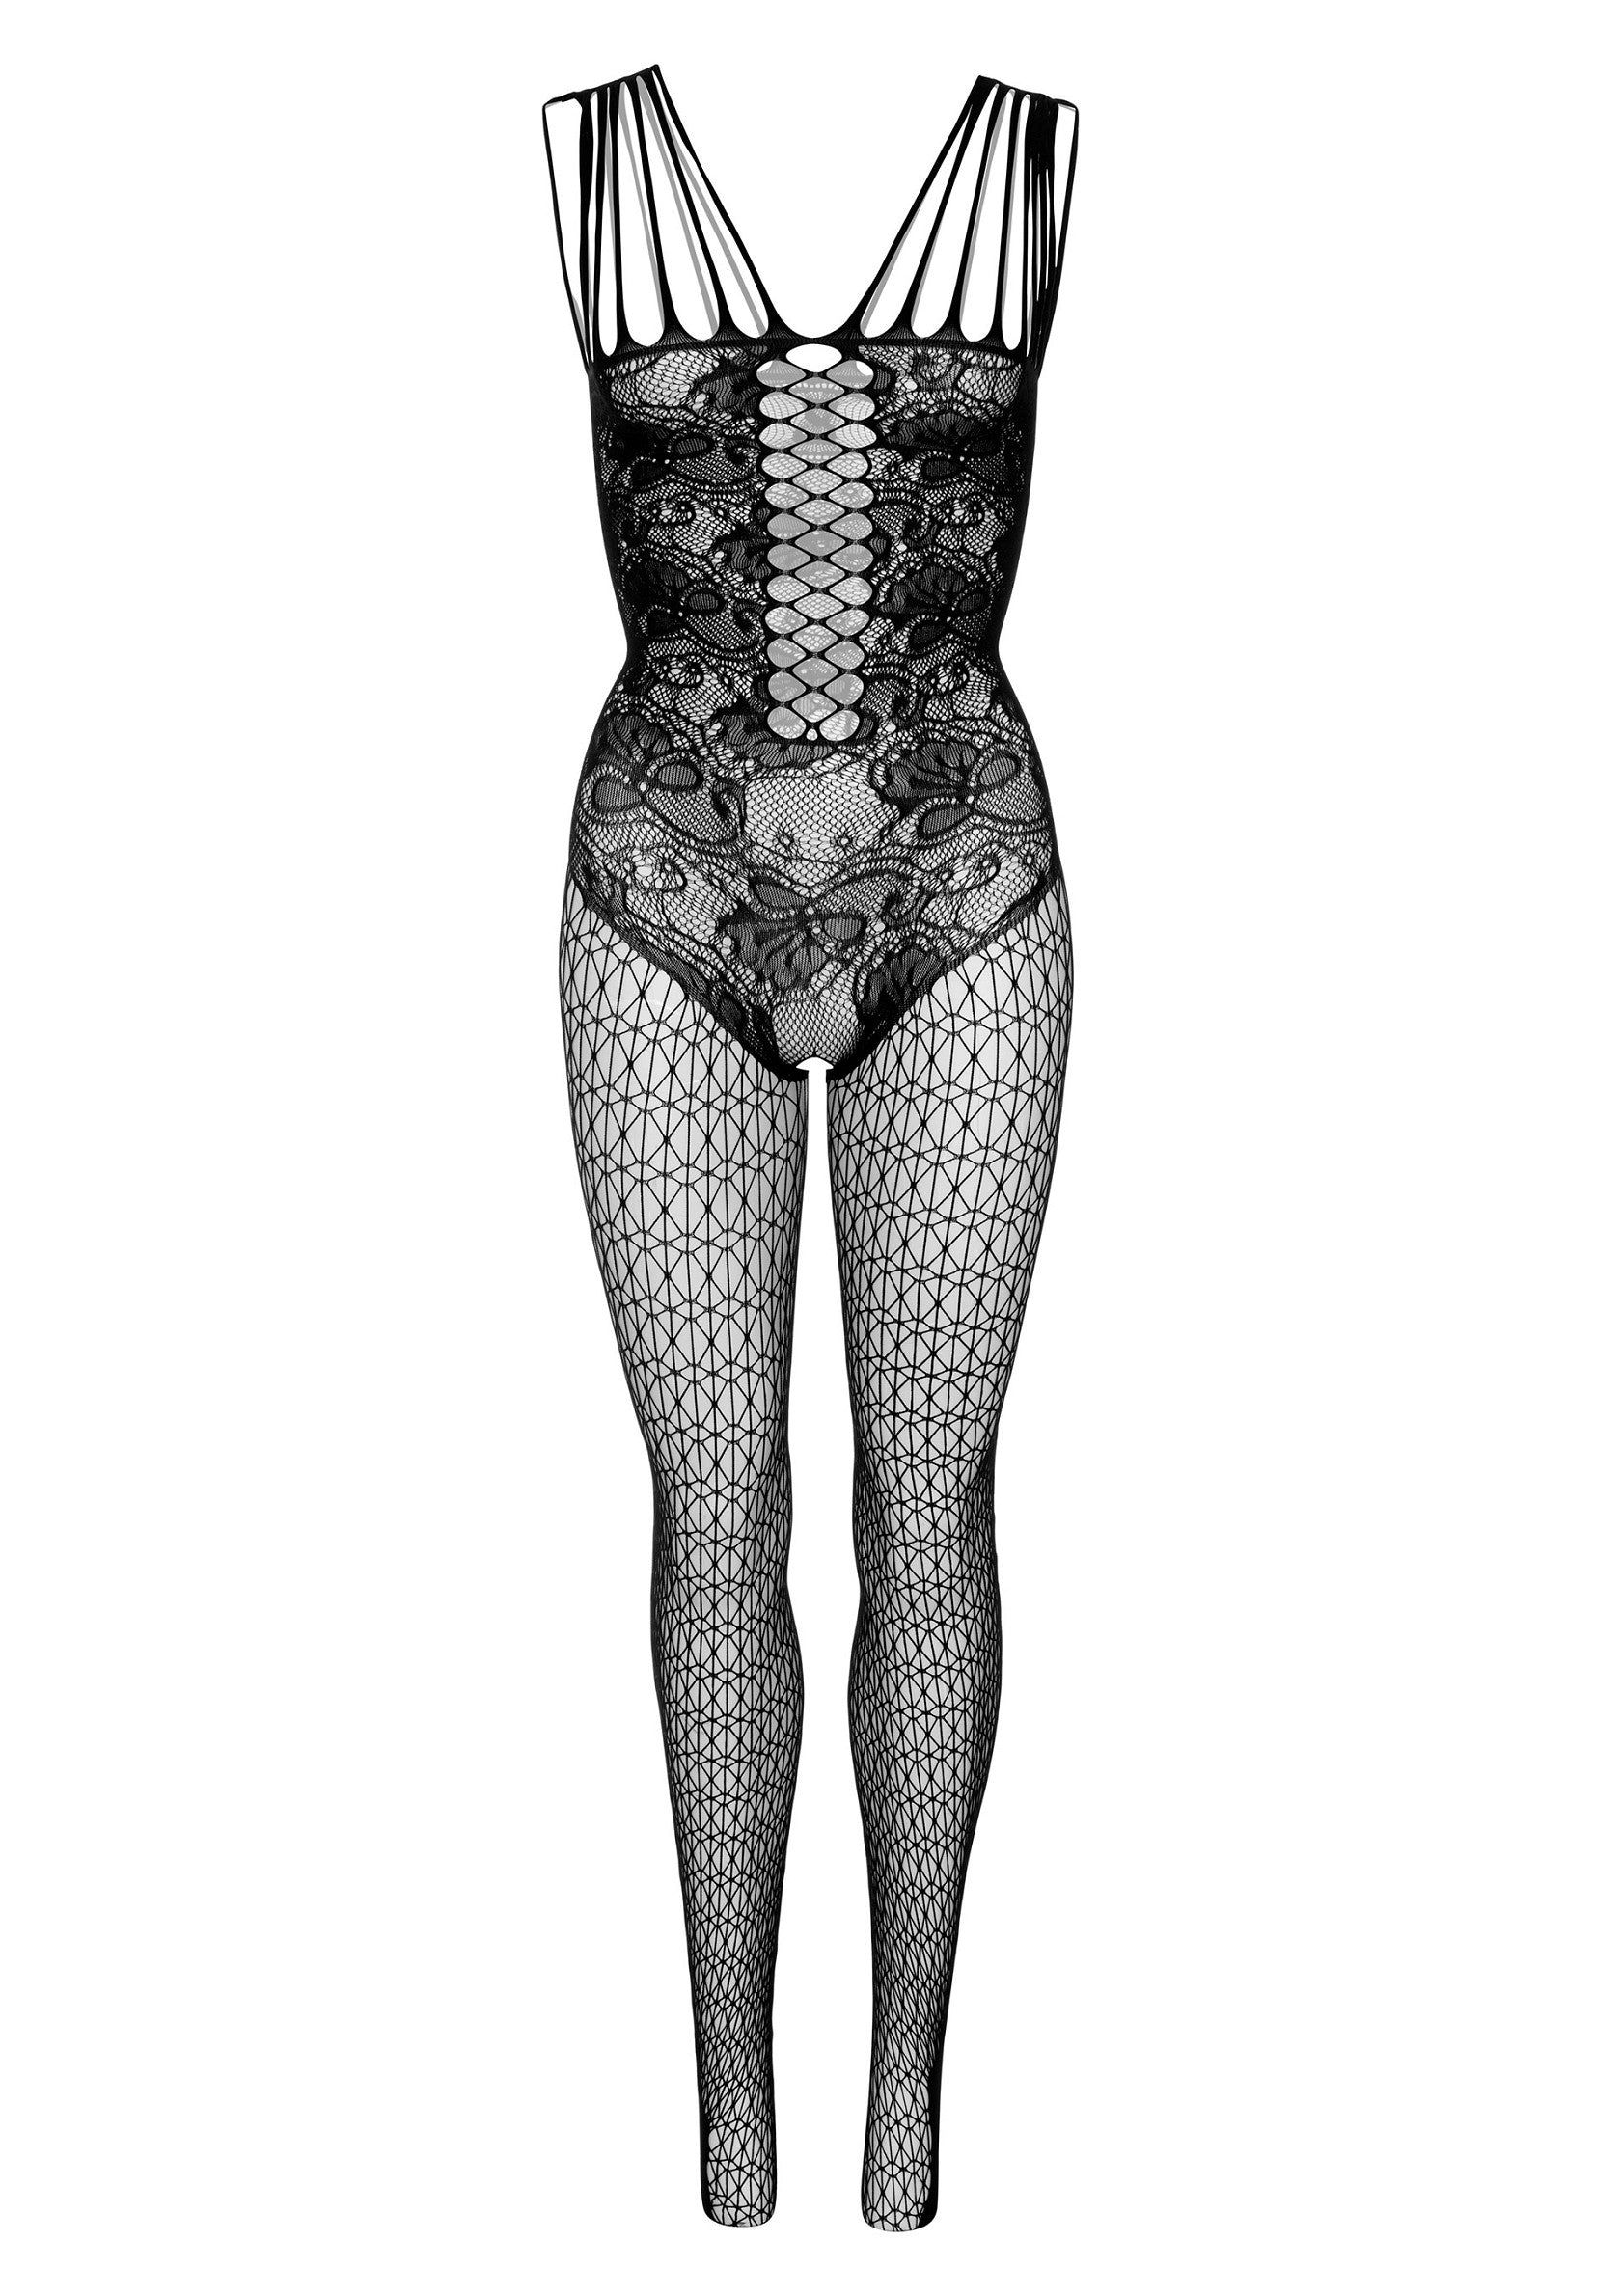 Daring Intimates Hex and Lace Net Bodystocking BLACK O/S - 7